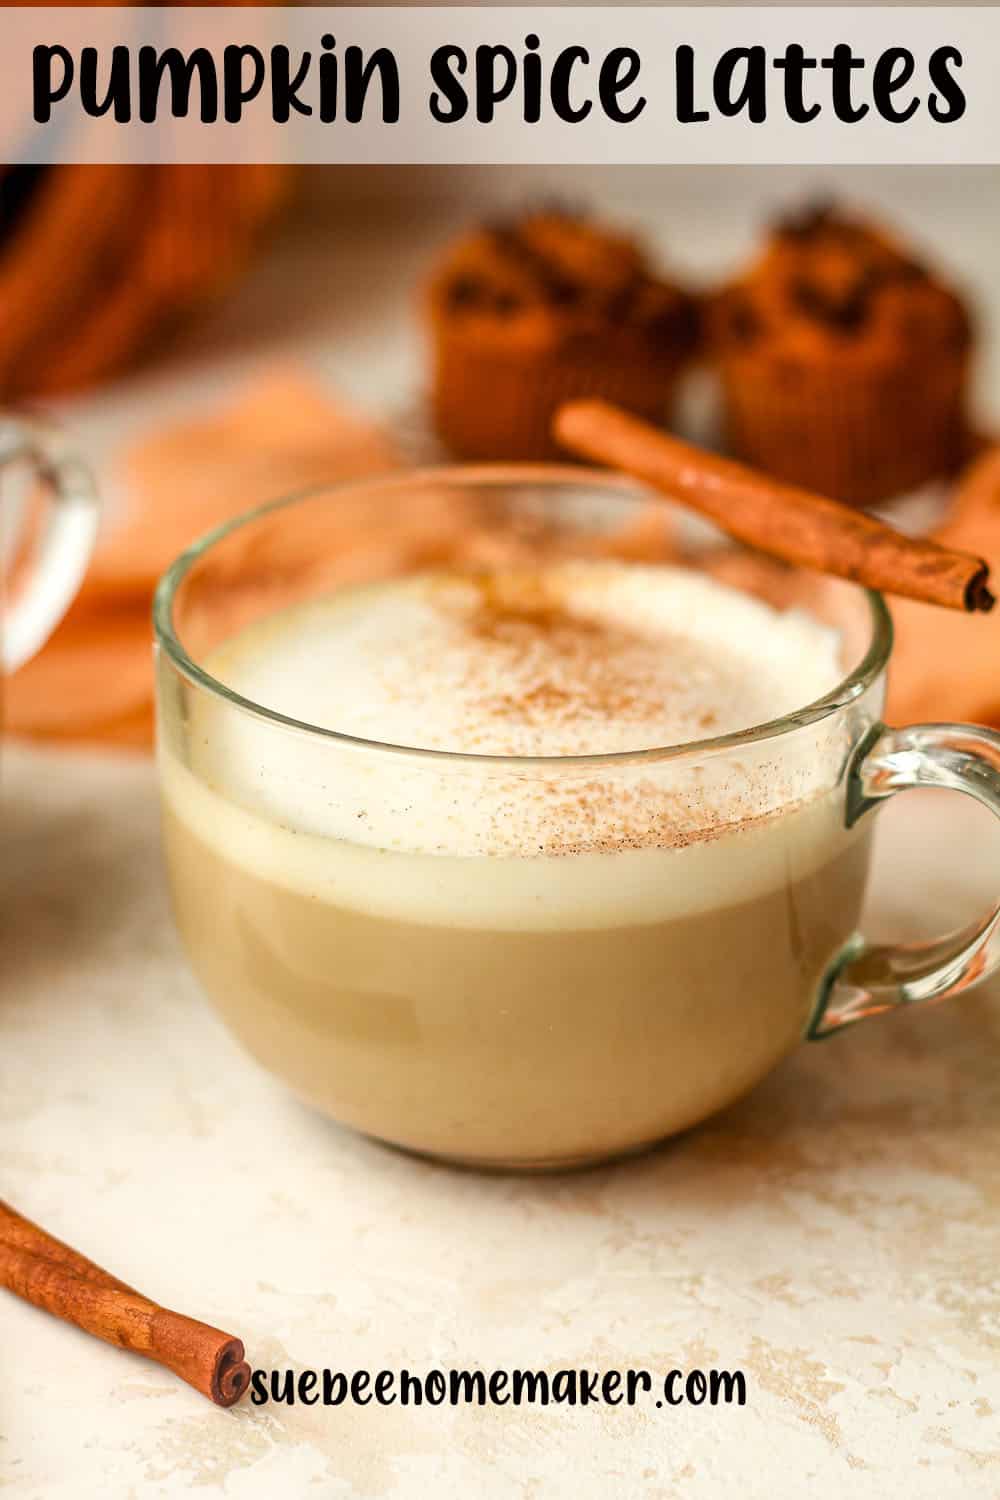 Side view of a pumpkin spice latte with a cinnamon stick.